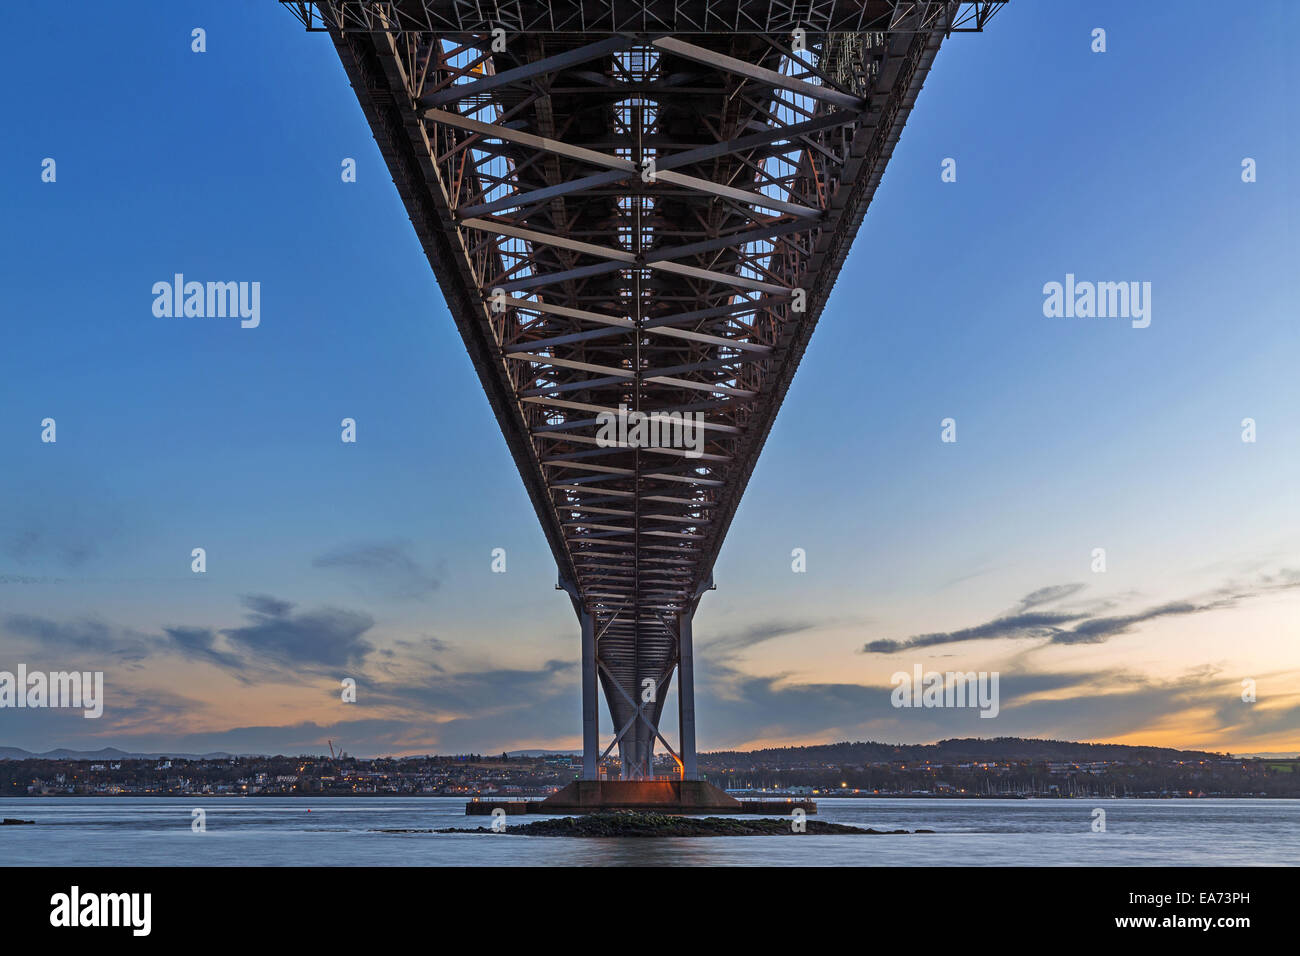 The Forth Road Bridge from below as seen from North Queensferry, Scotland not long after sunset Stock Photo